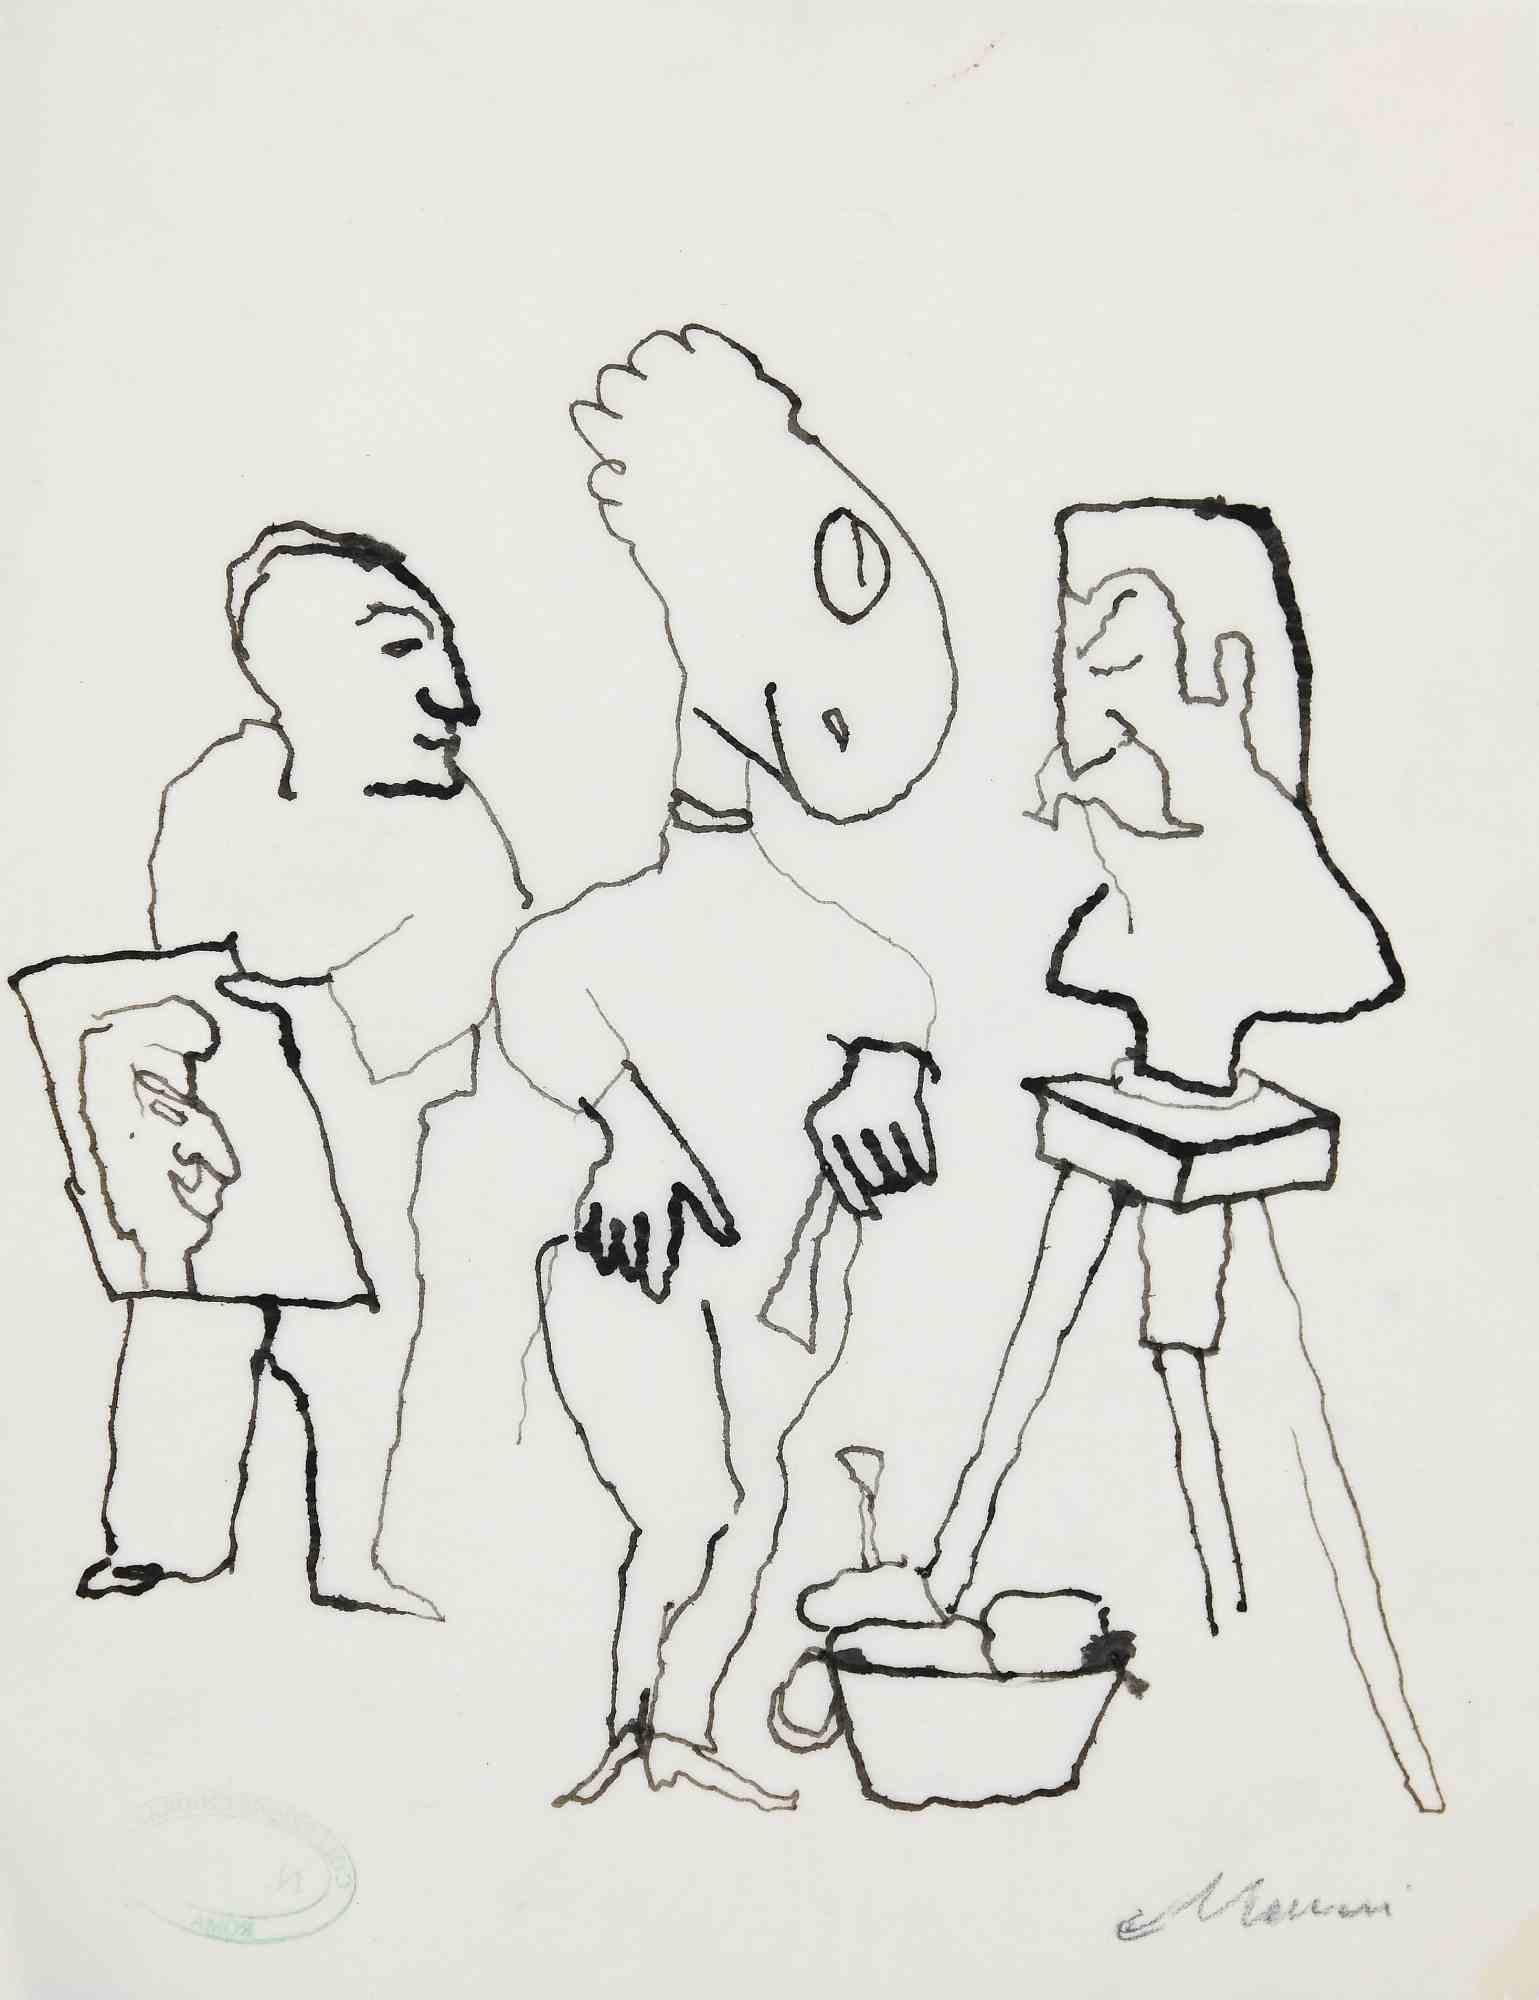 The Sculptor and The Painter is an original China Ink Drawing realized by Mino Maccari in mid-20th Century.

Good condition on a tissue paper.

Hand-signed by the artist with pencil.

Mino Maccari (1898-1989) was an Italian writer, painter, engraver